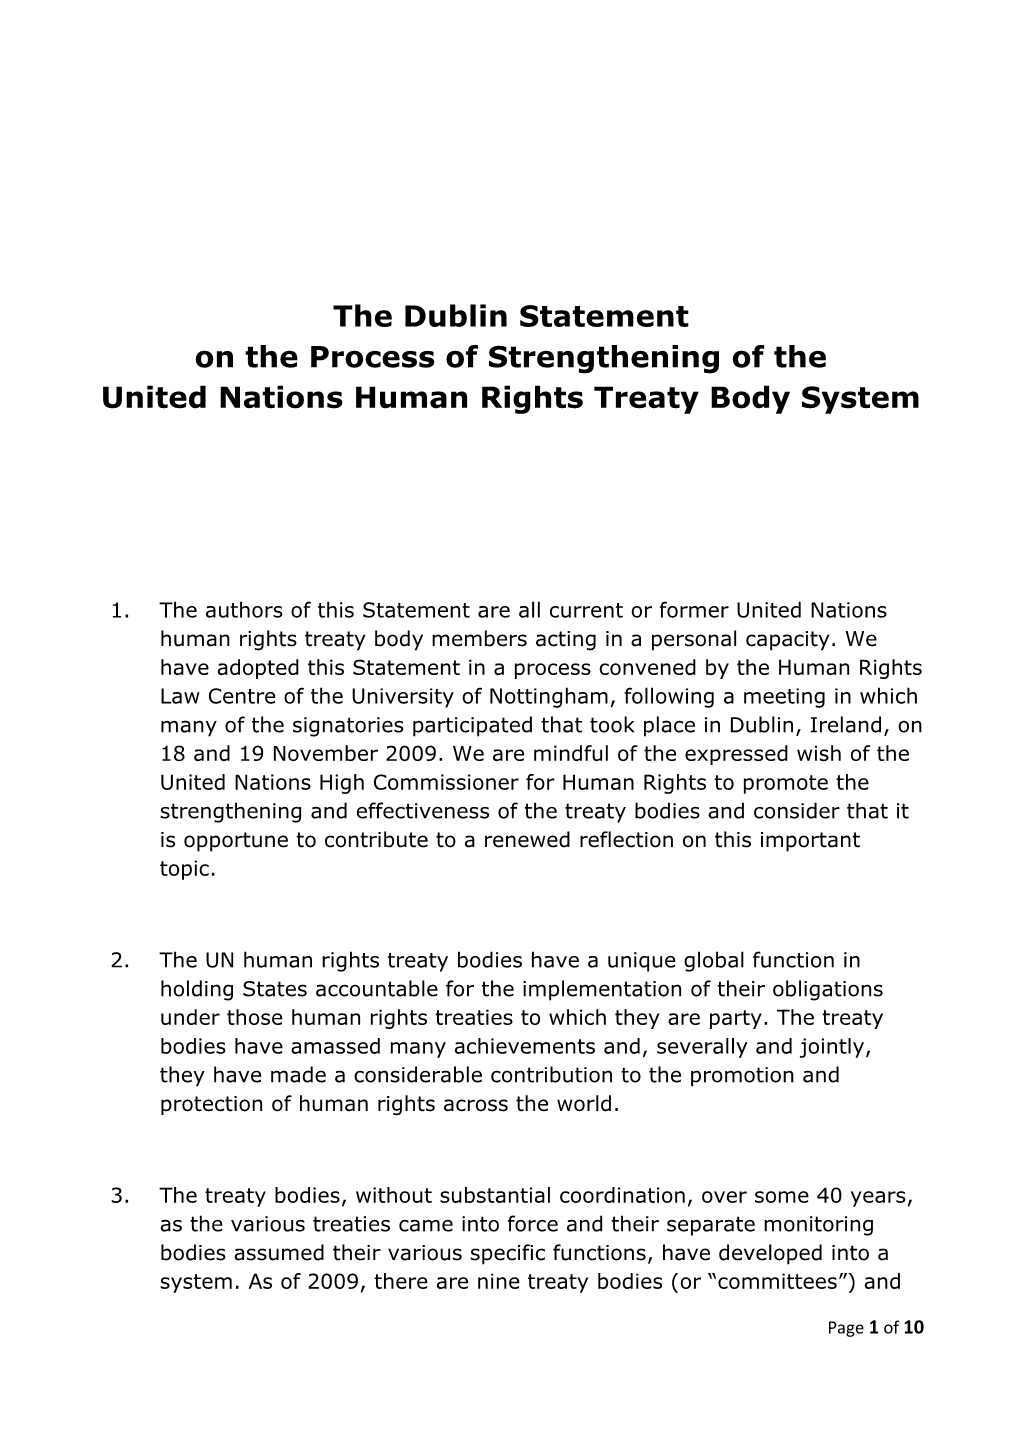 The Dublin Statement on the Process of Strengthening of the United Nations Human Rights